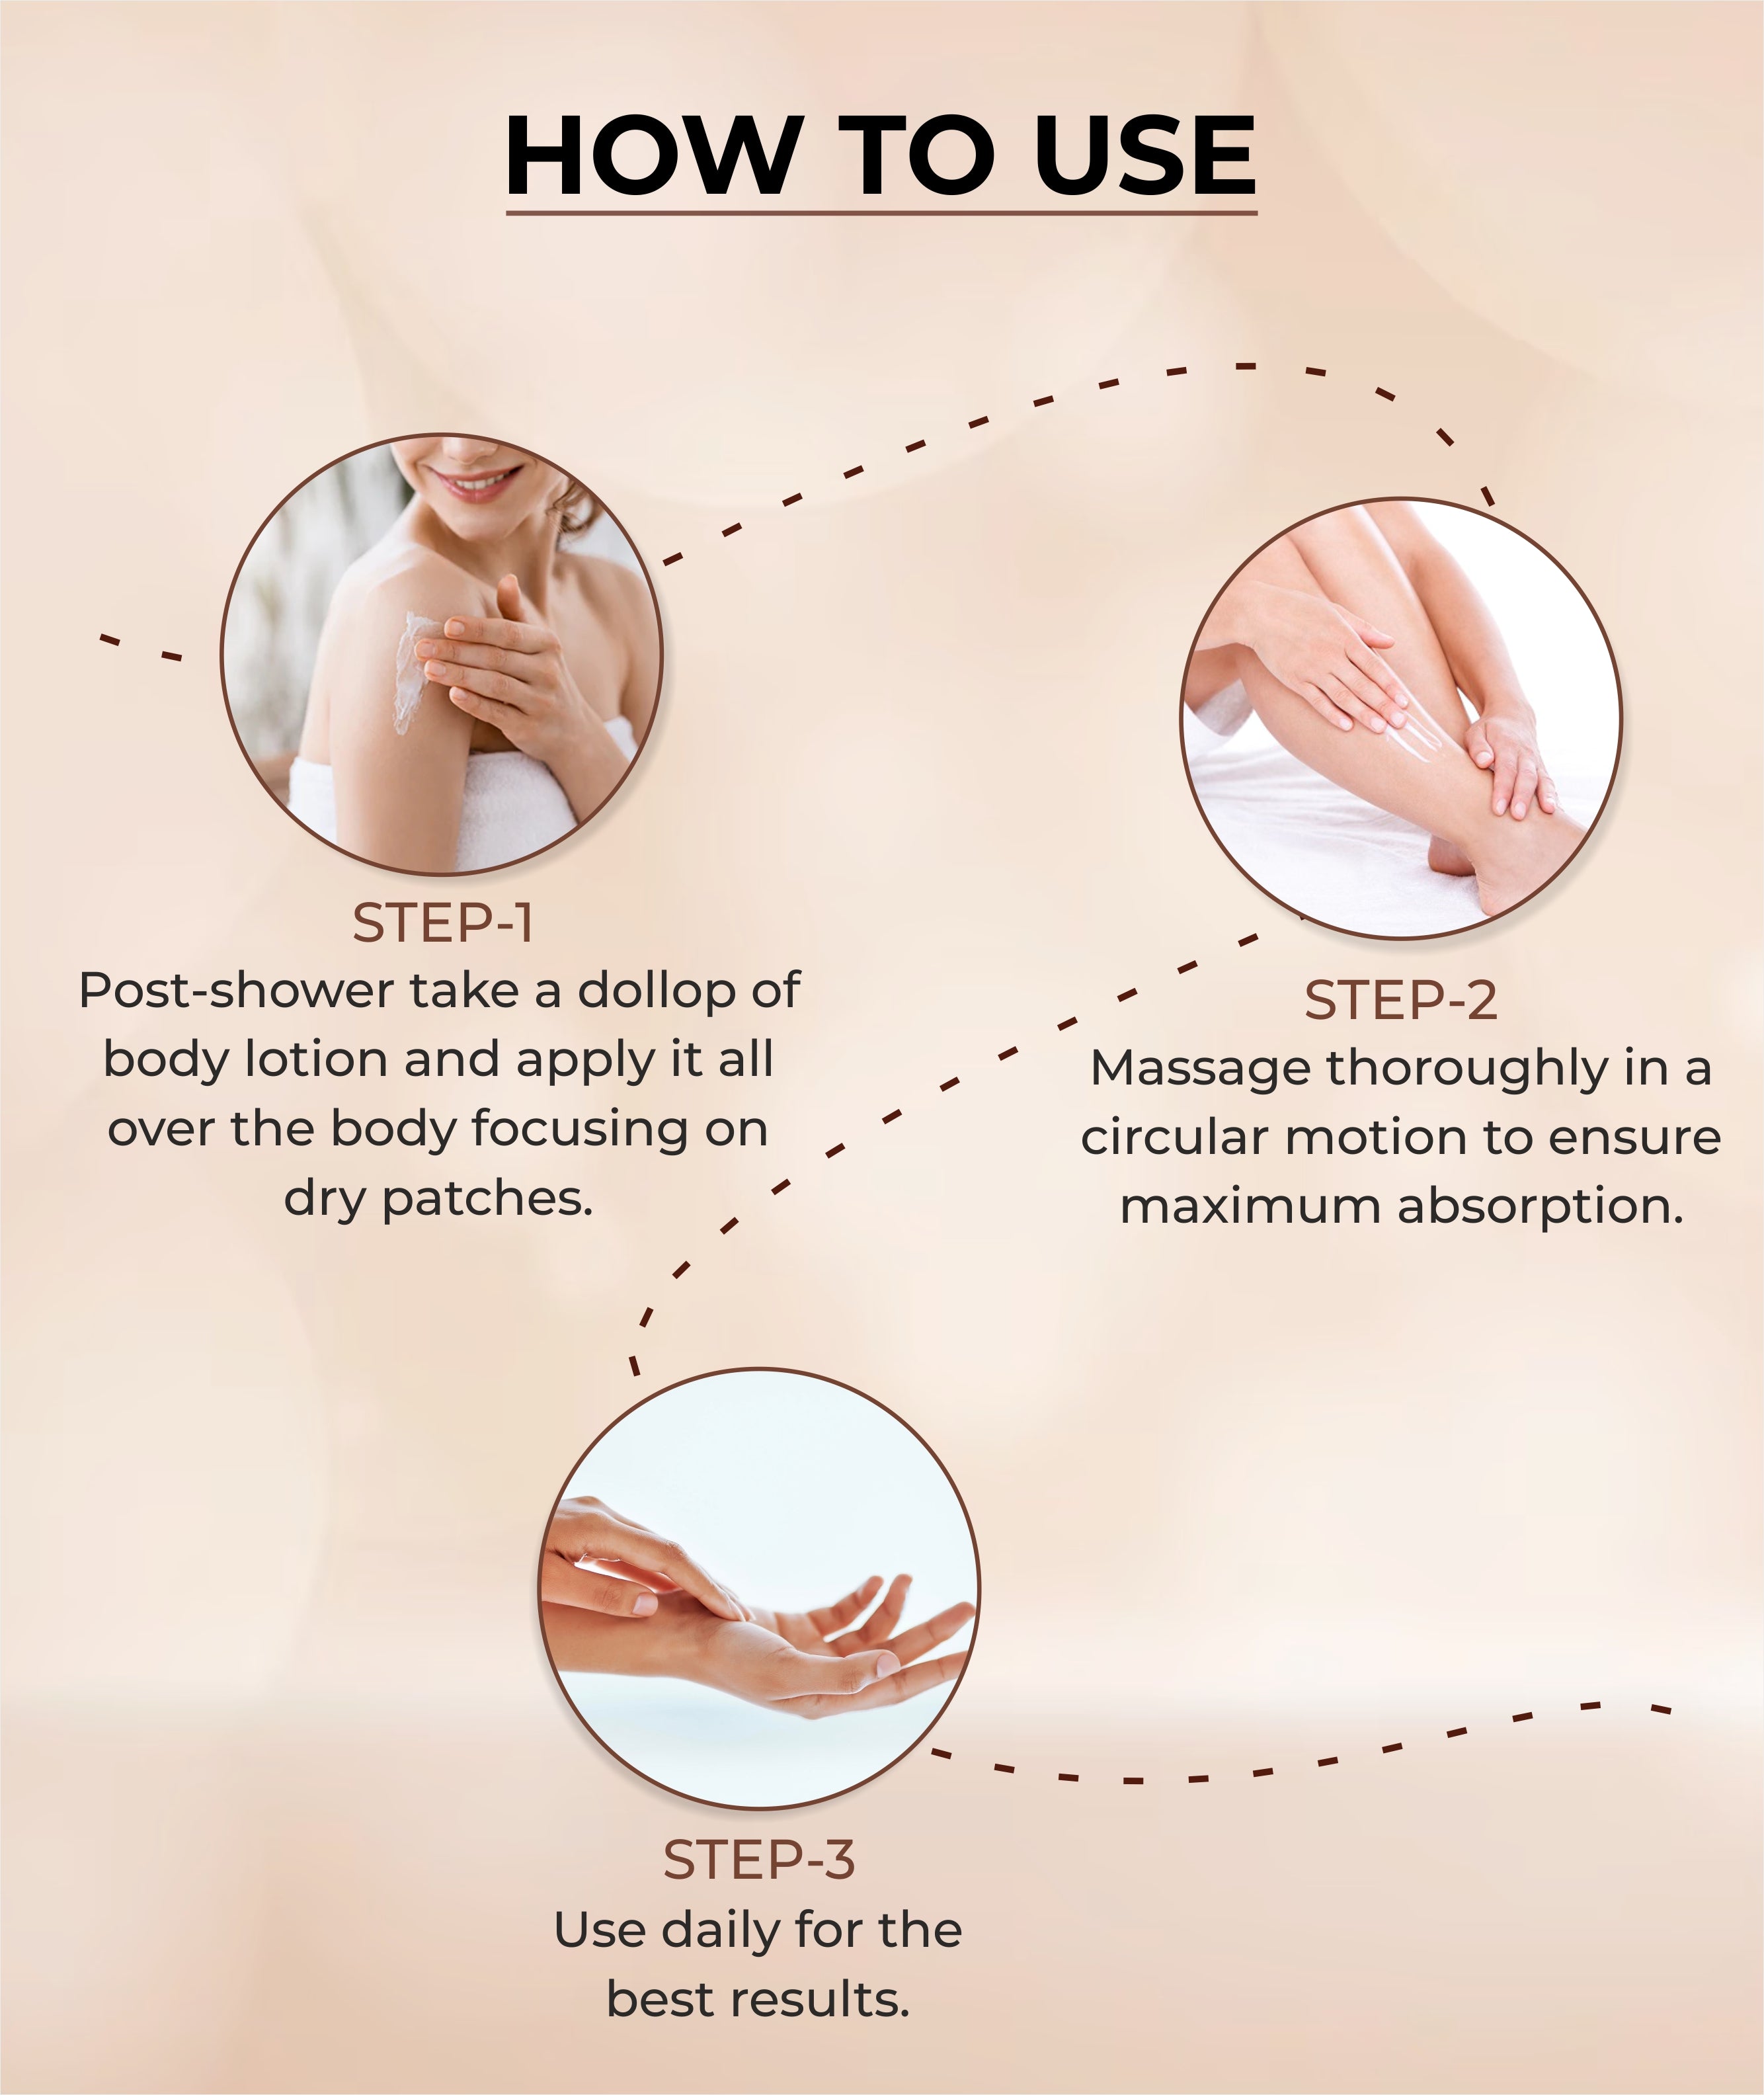 Steps Showing How To Use This Vitamin C And Ceramide Body Lotion